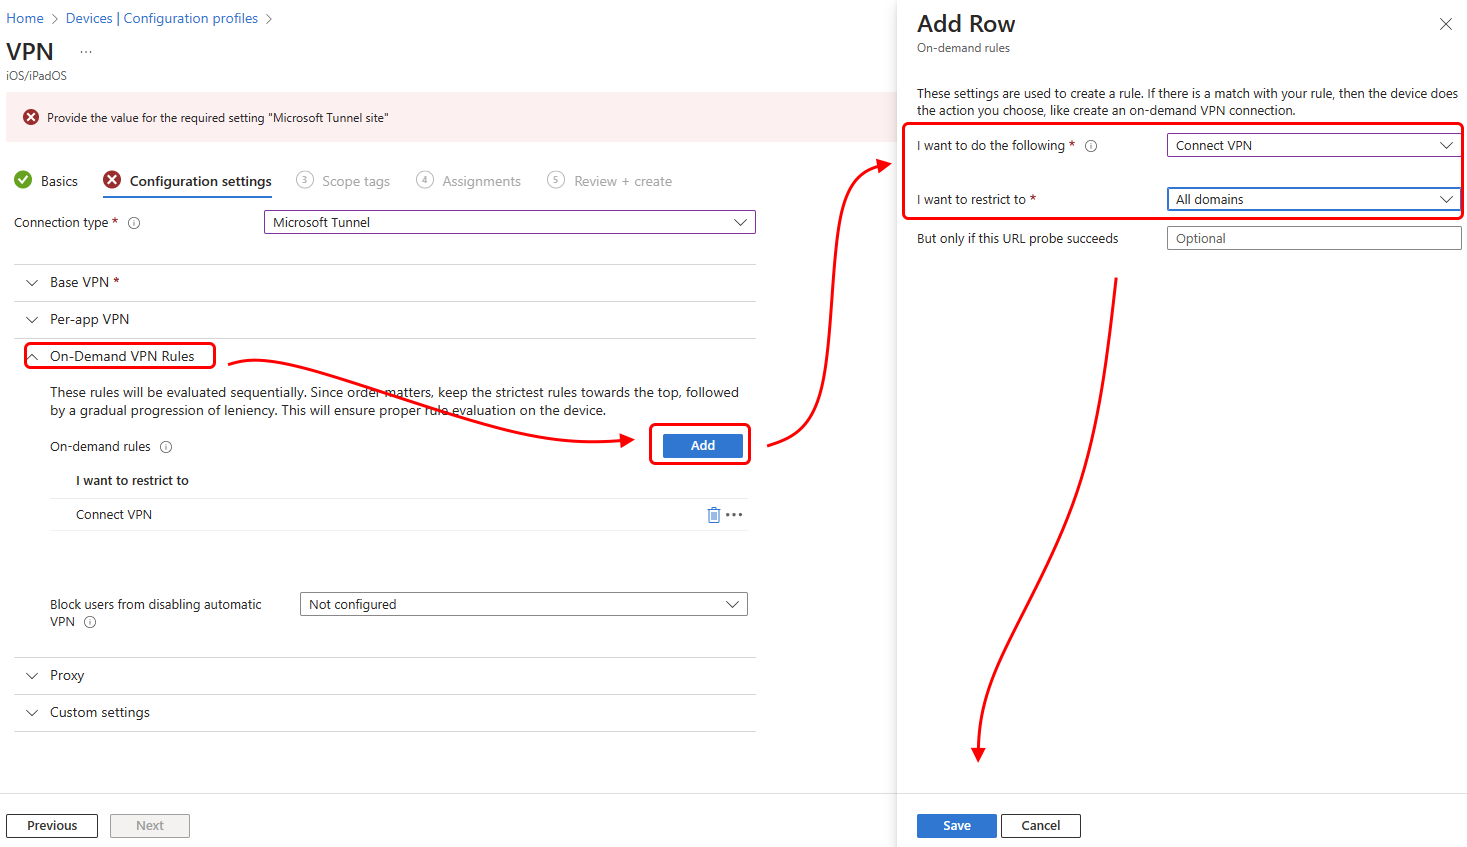 Screen shot of the Add Row pane where you configure the on-demand rule.